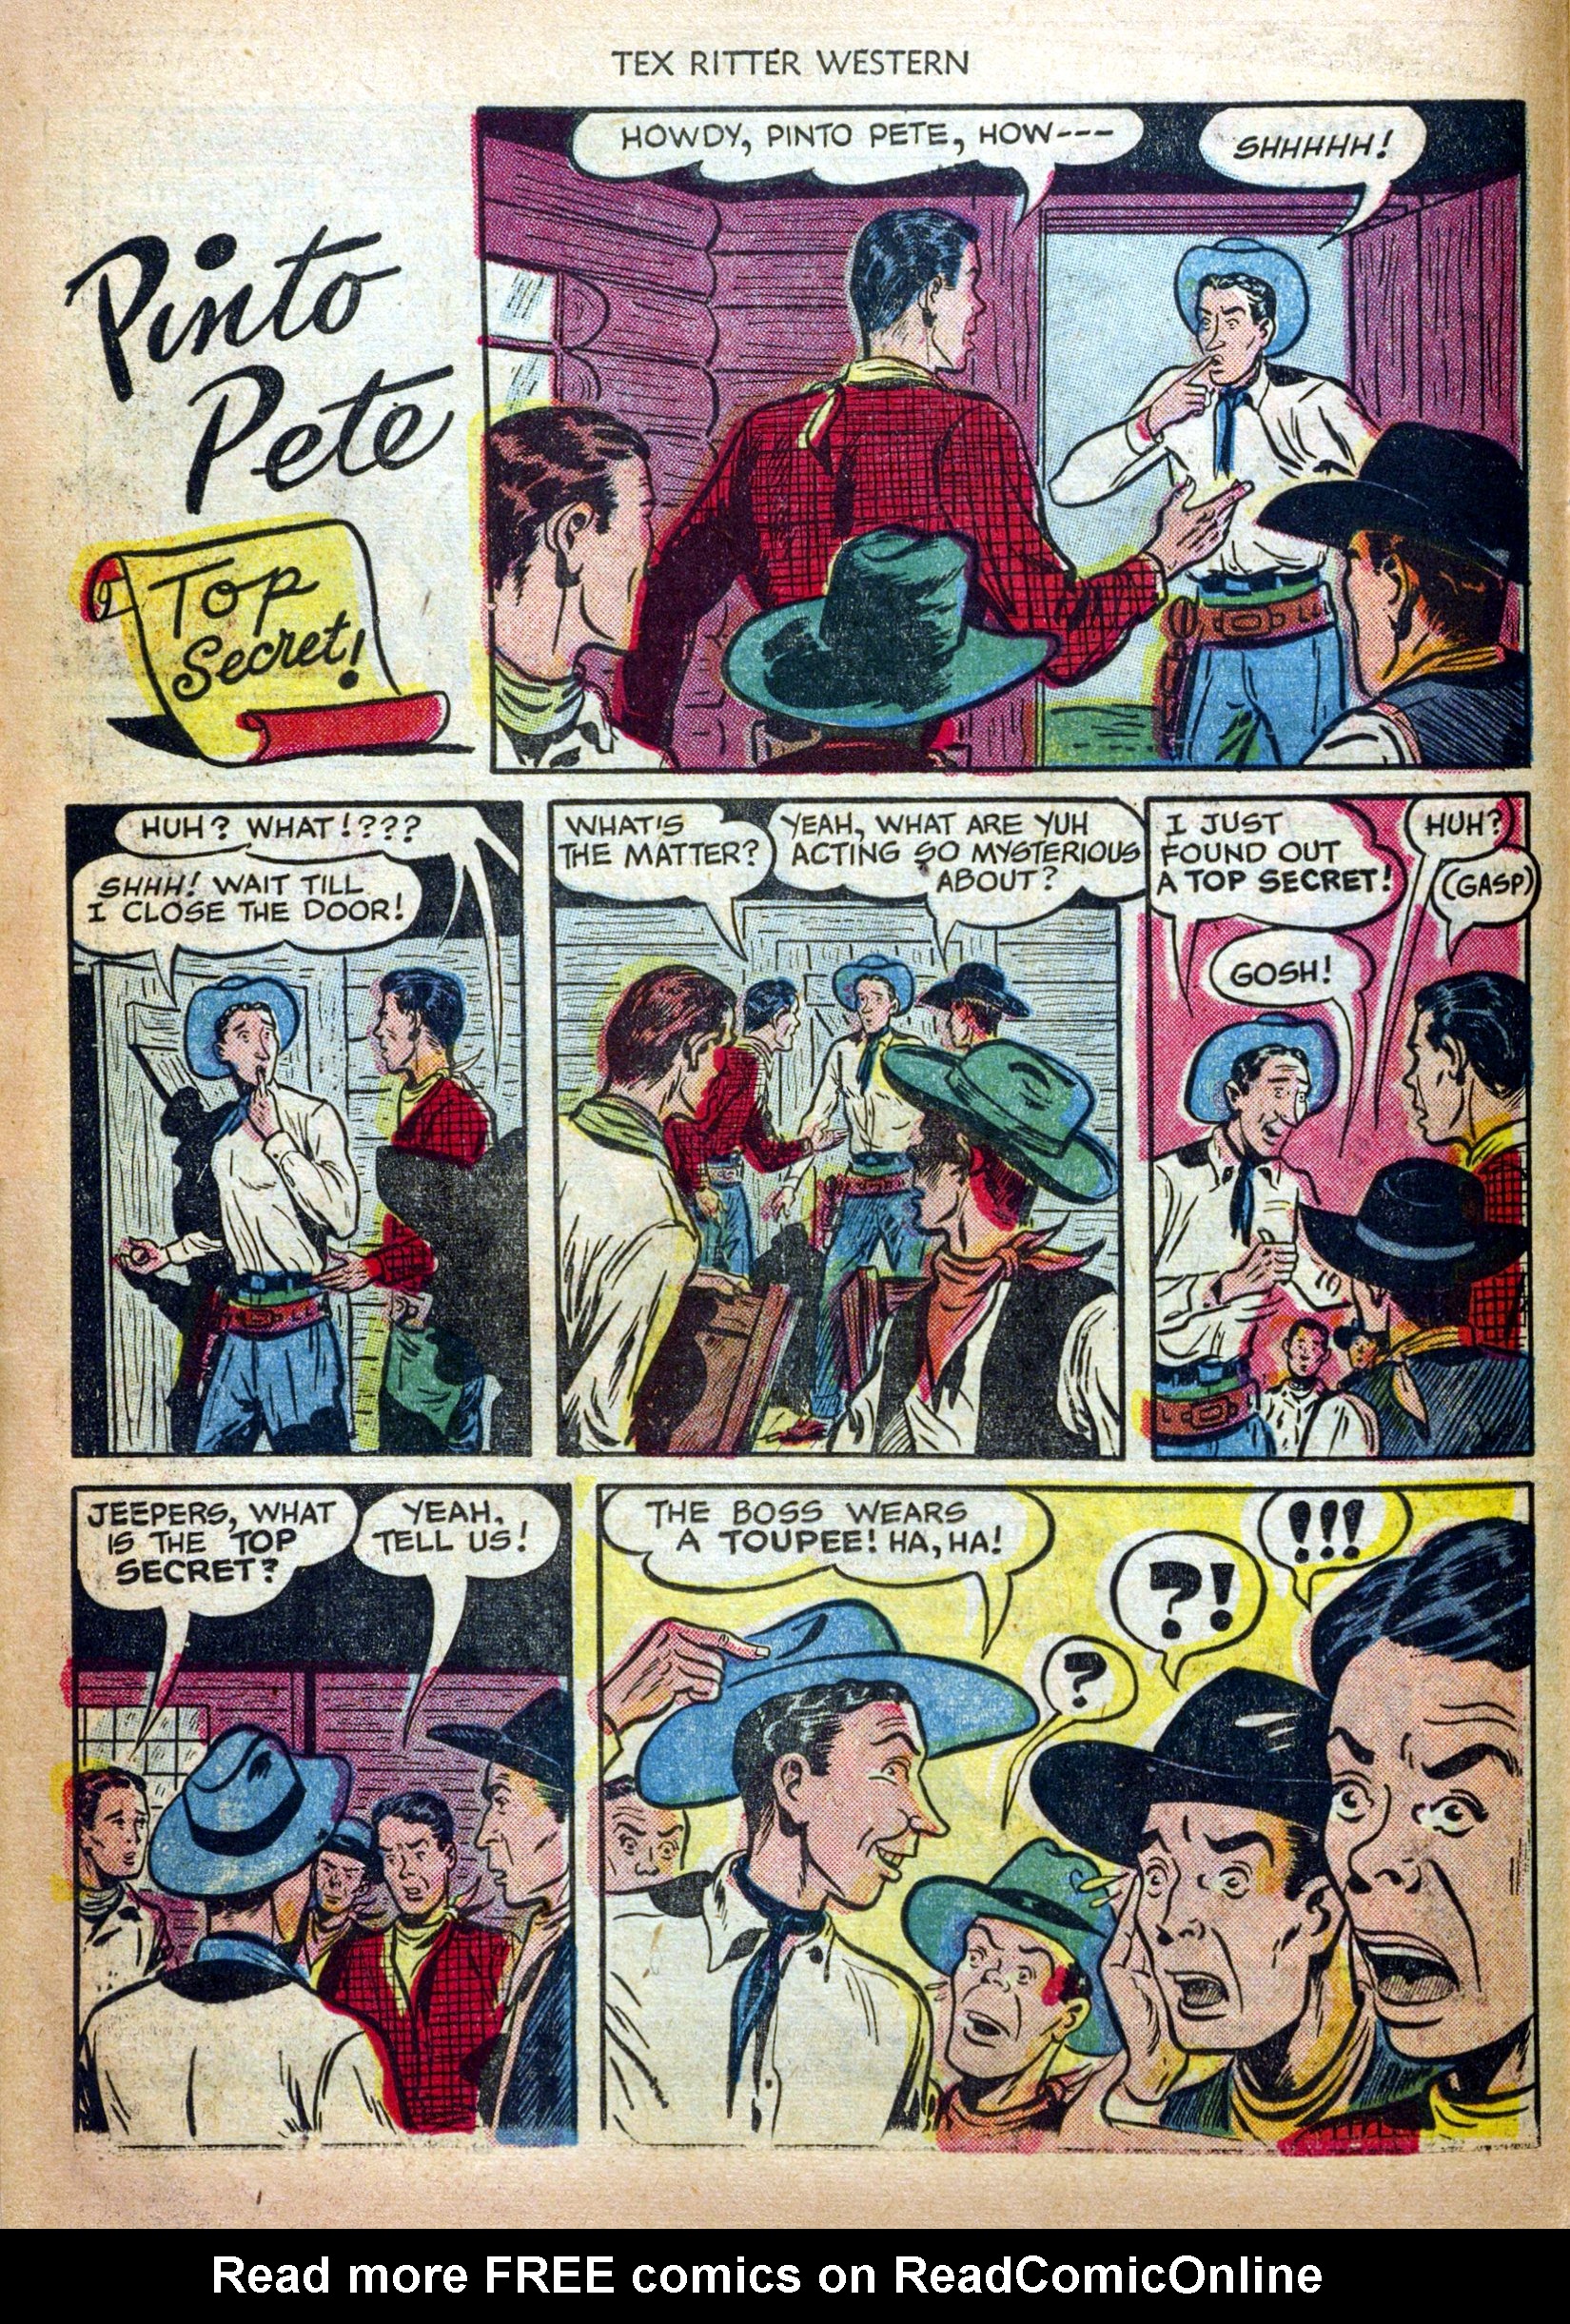 Read online Tex Ritter Western comic -  Issue #12 - 10